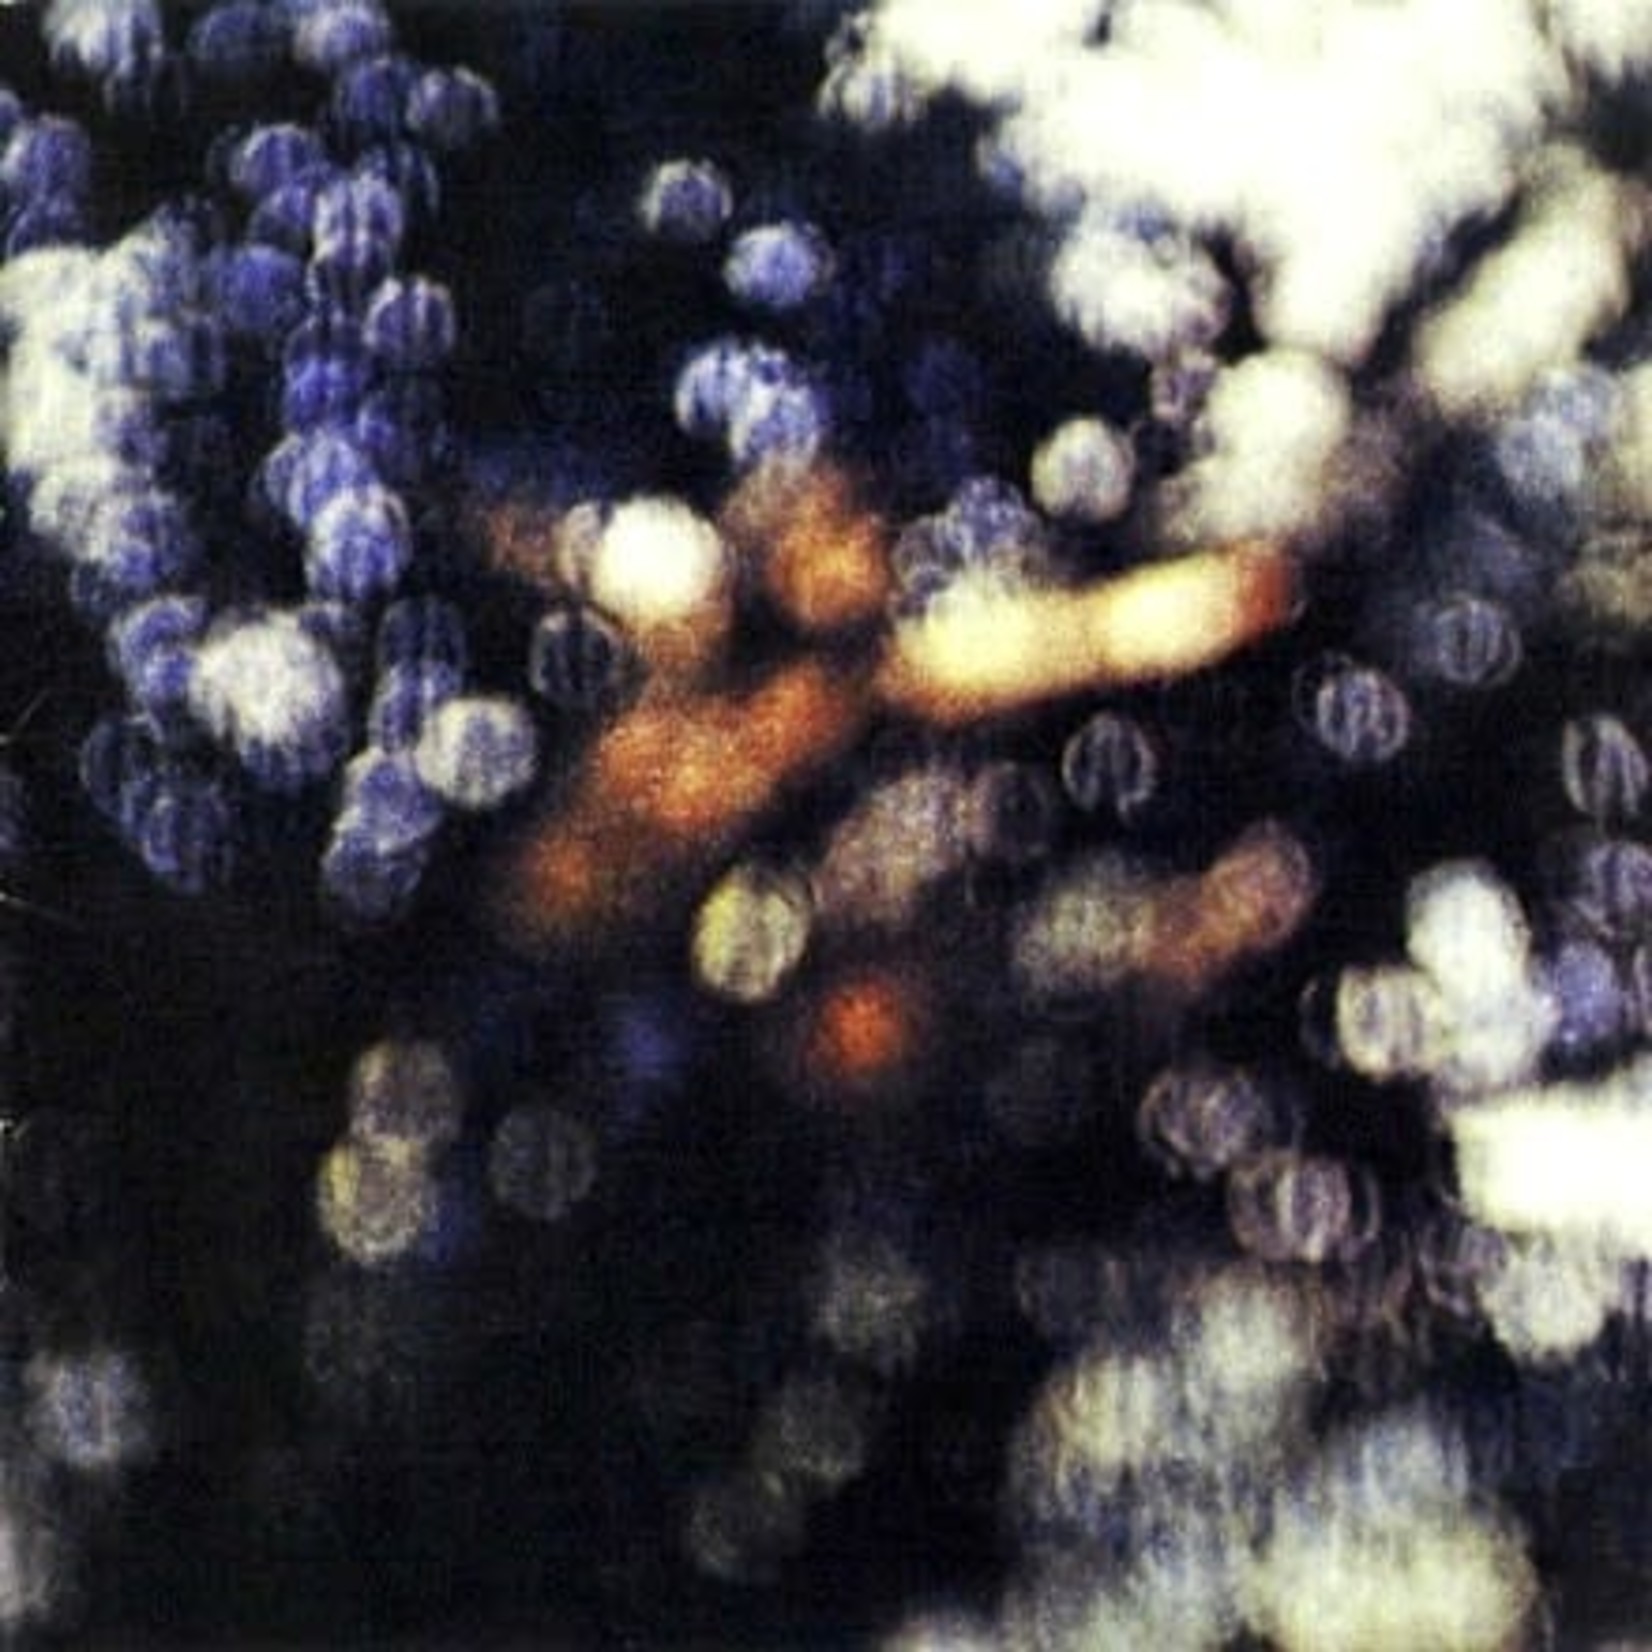 [New] Pink Floyd - Obscured By Clouds (2016 remaster)